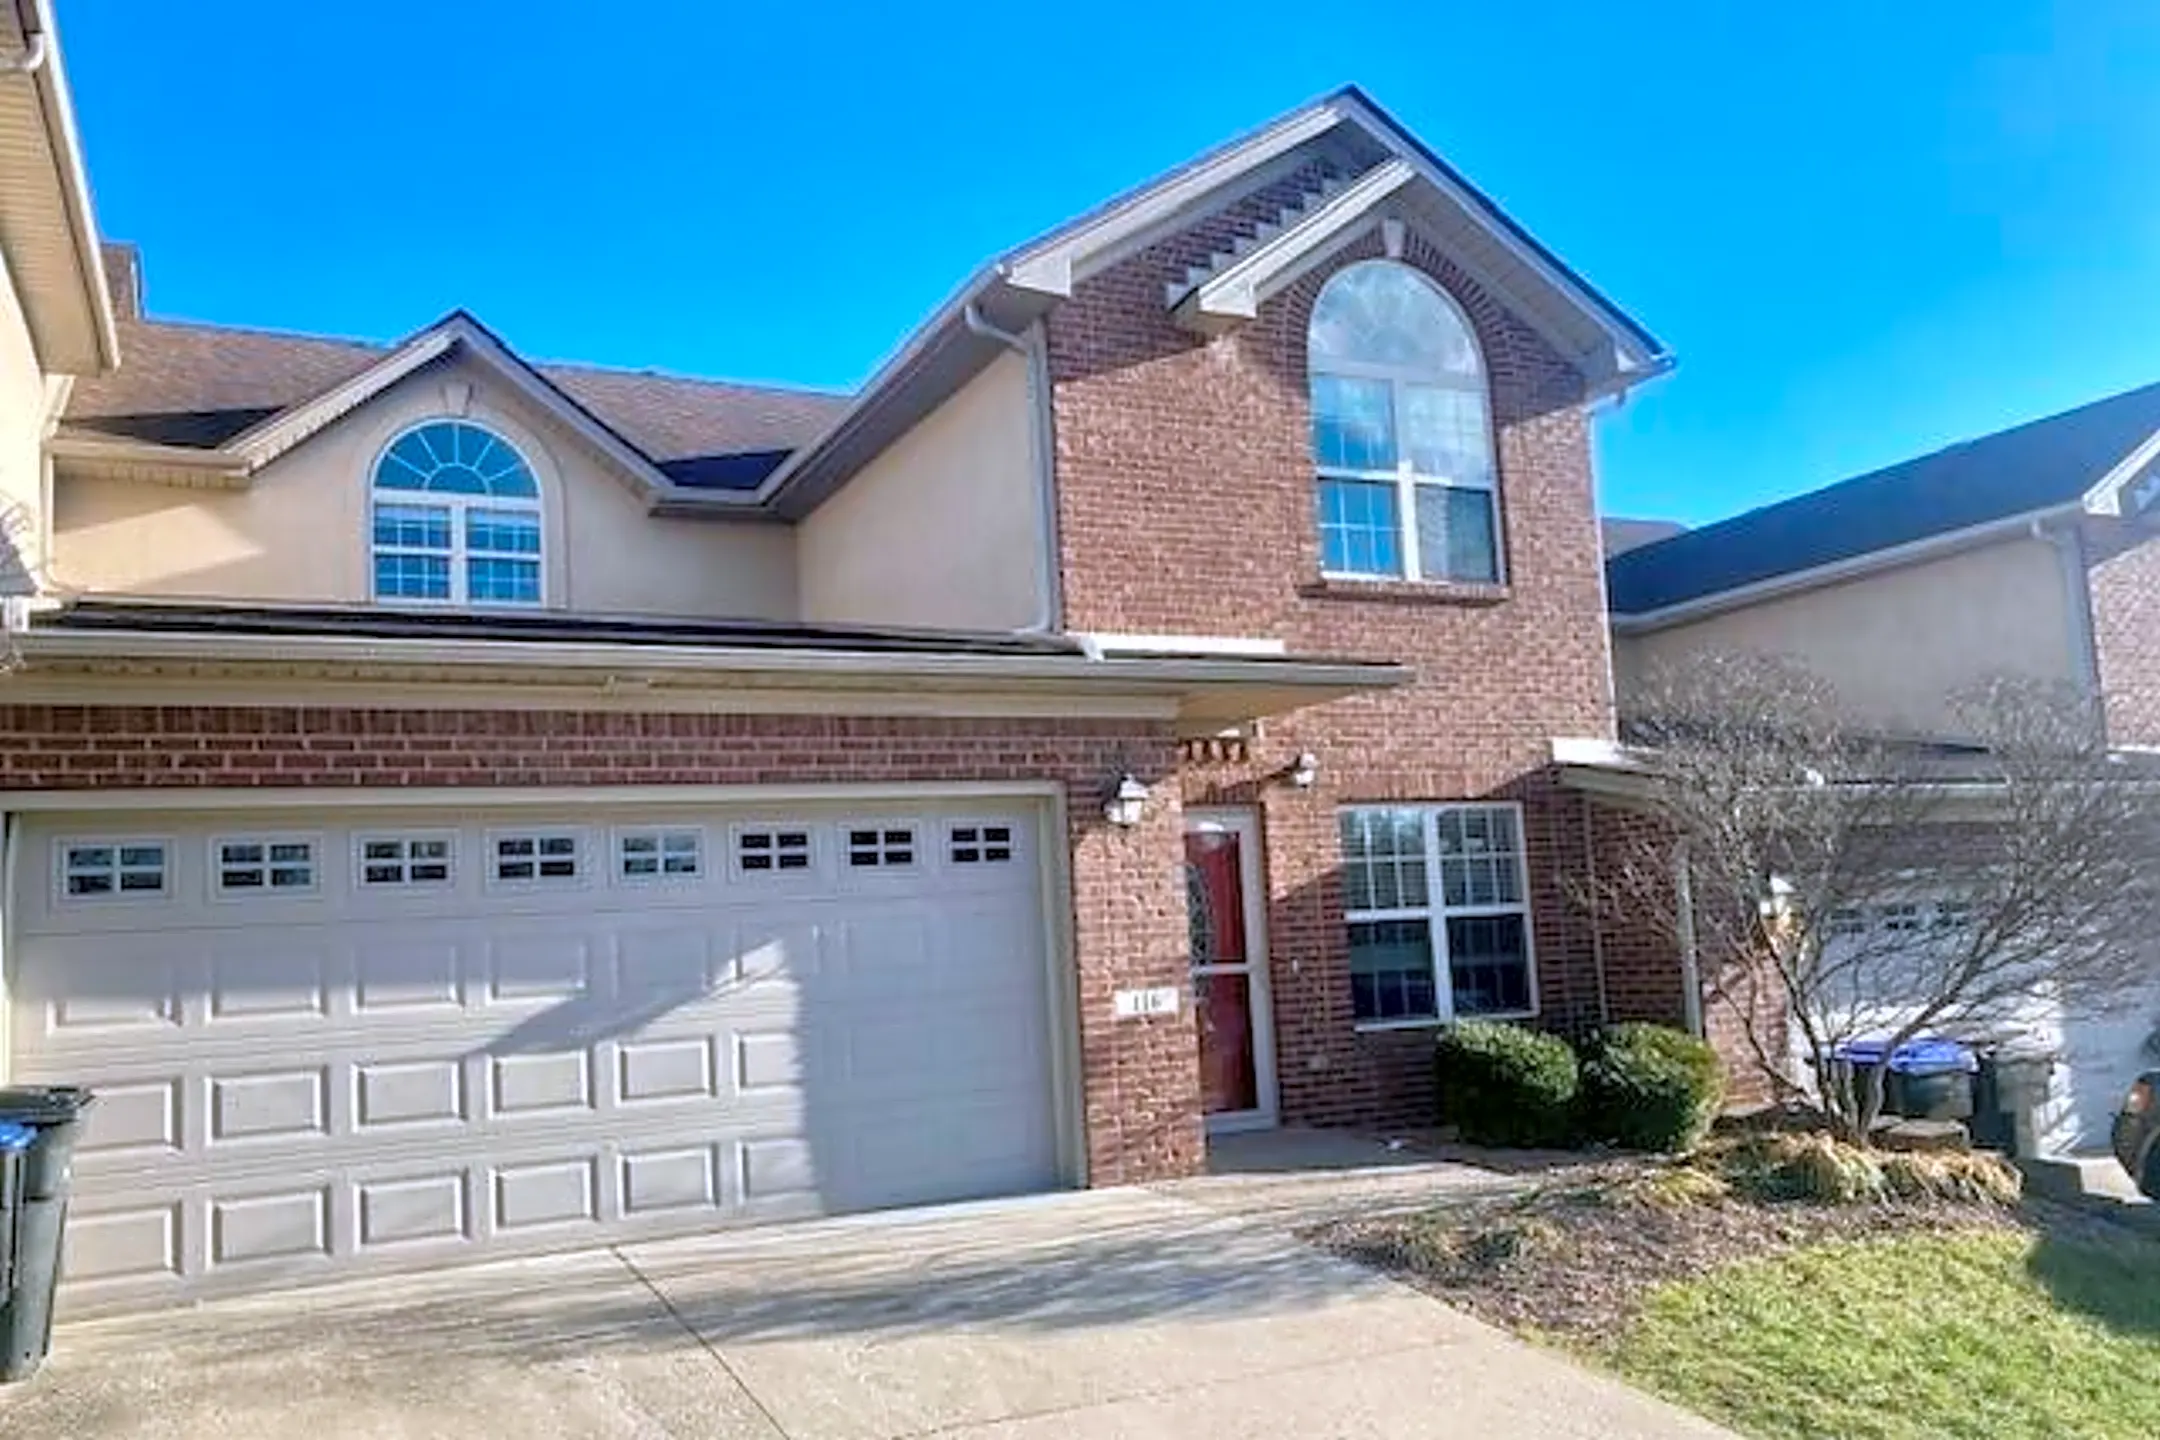 Building - 116 Tuscany Ln - Frankfort, KY